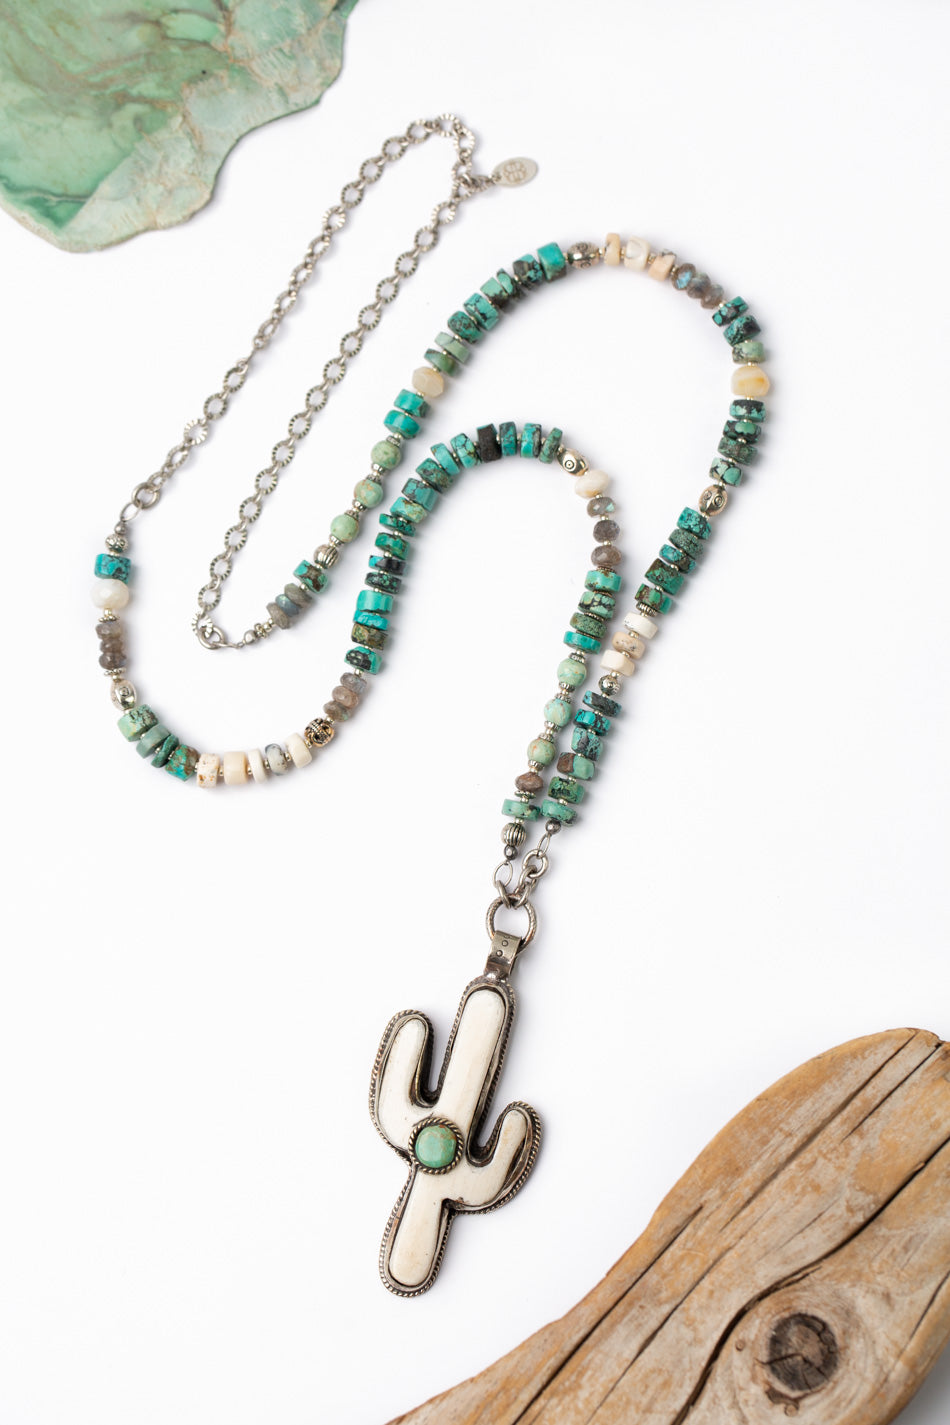 One Of A Kind 34" Natural Turquoise, Dendritic Opal With Tibetan Cactus Pendant Statement Necklace